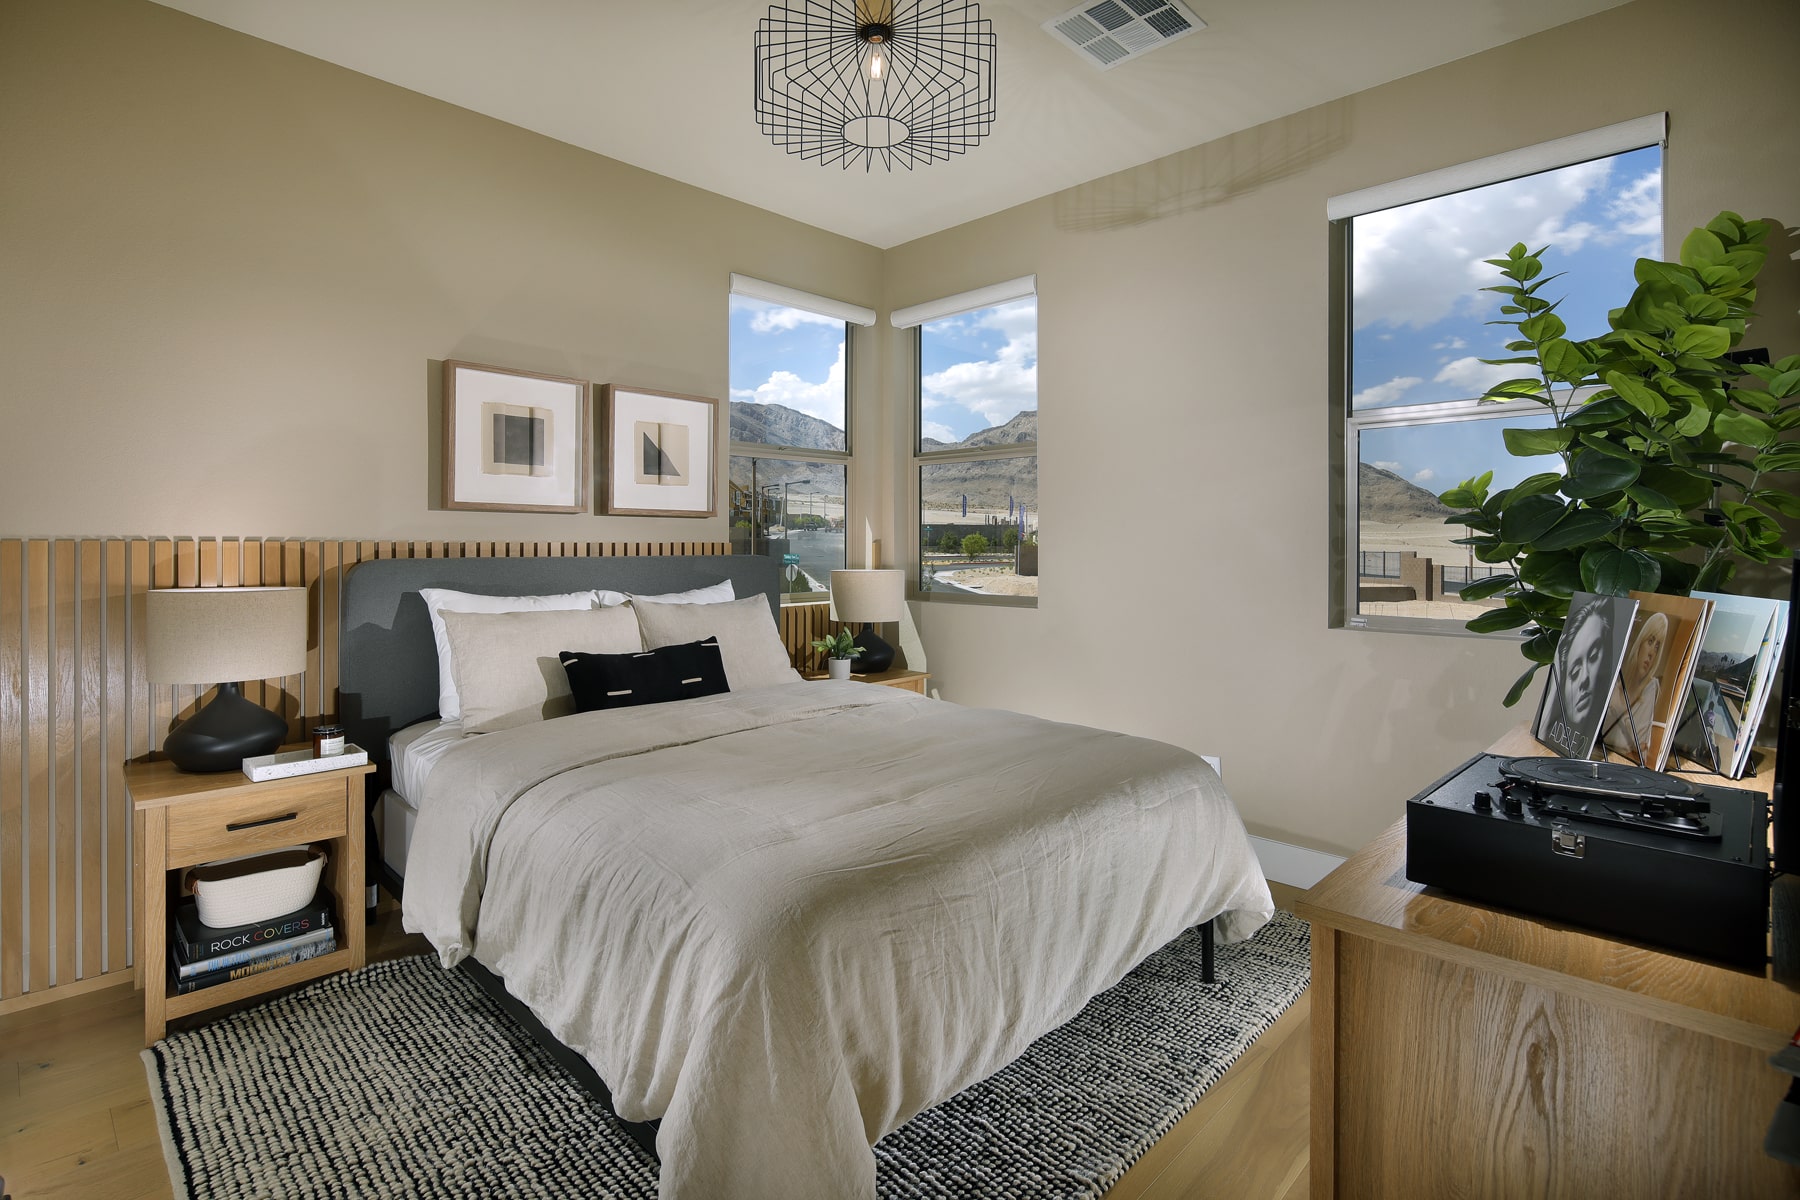 Second Bedroom of Plan 3 at Arroyos Edge by Tri Pointe Homes